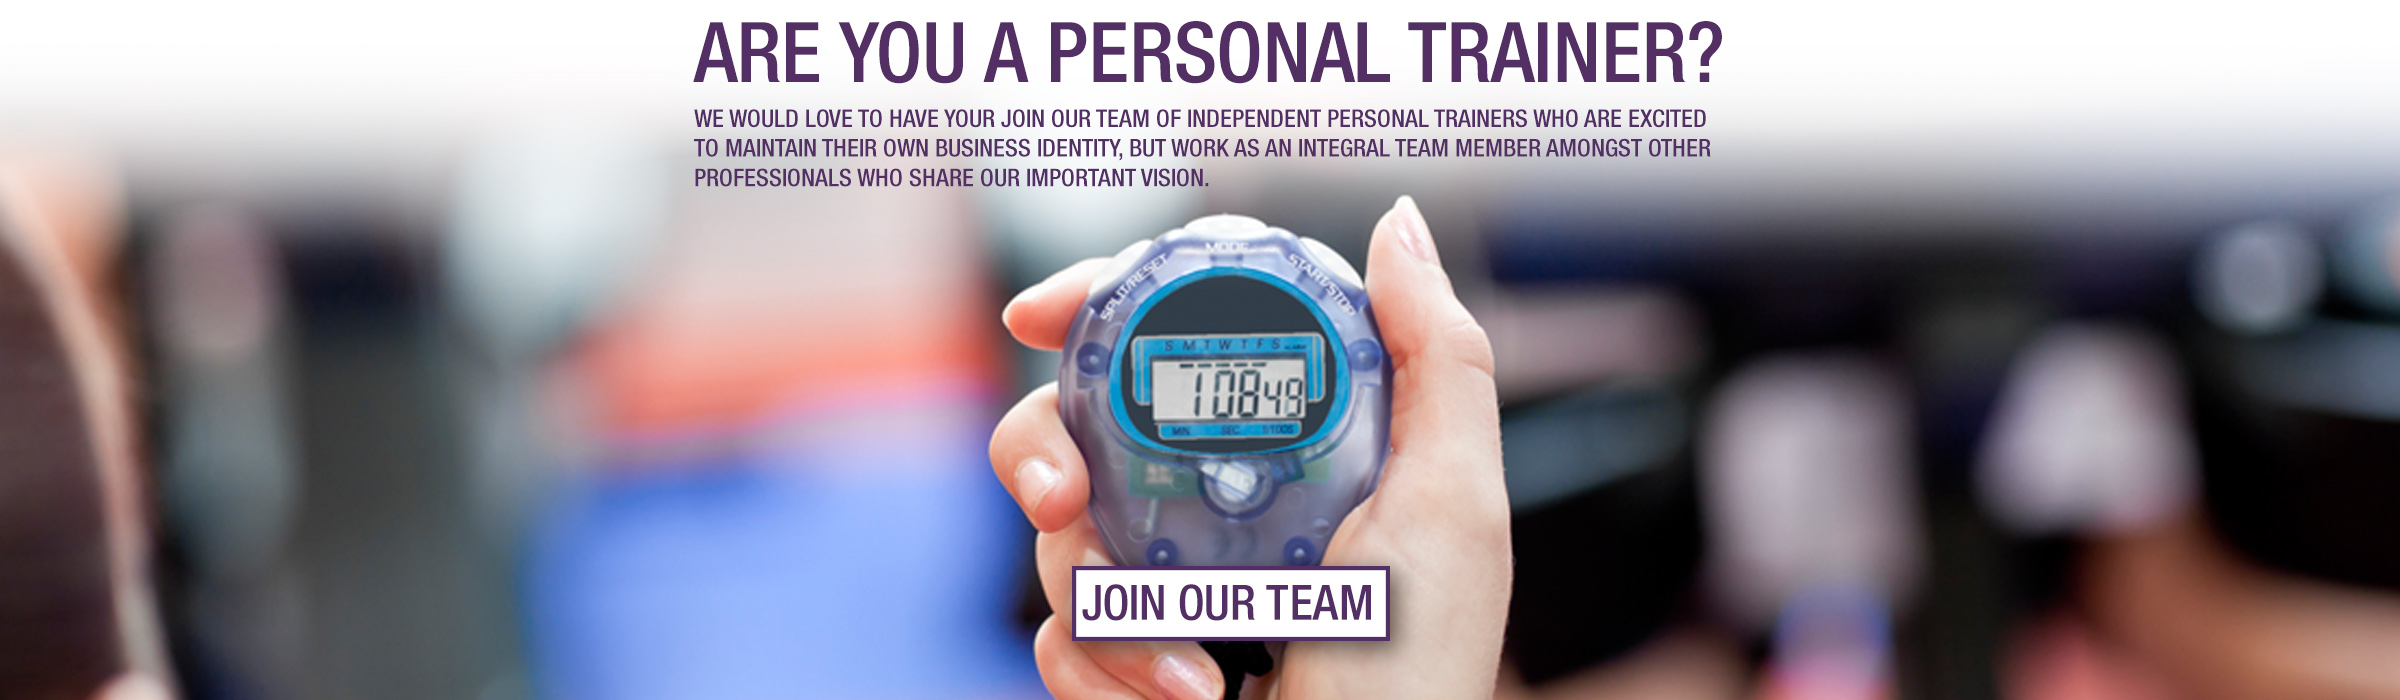 Are you a Personal Trainer? Bring your practice to HappyLee Fitness